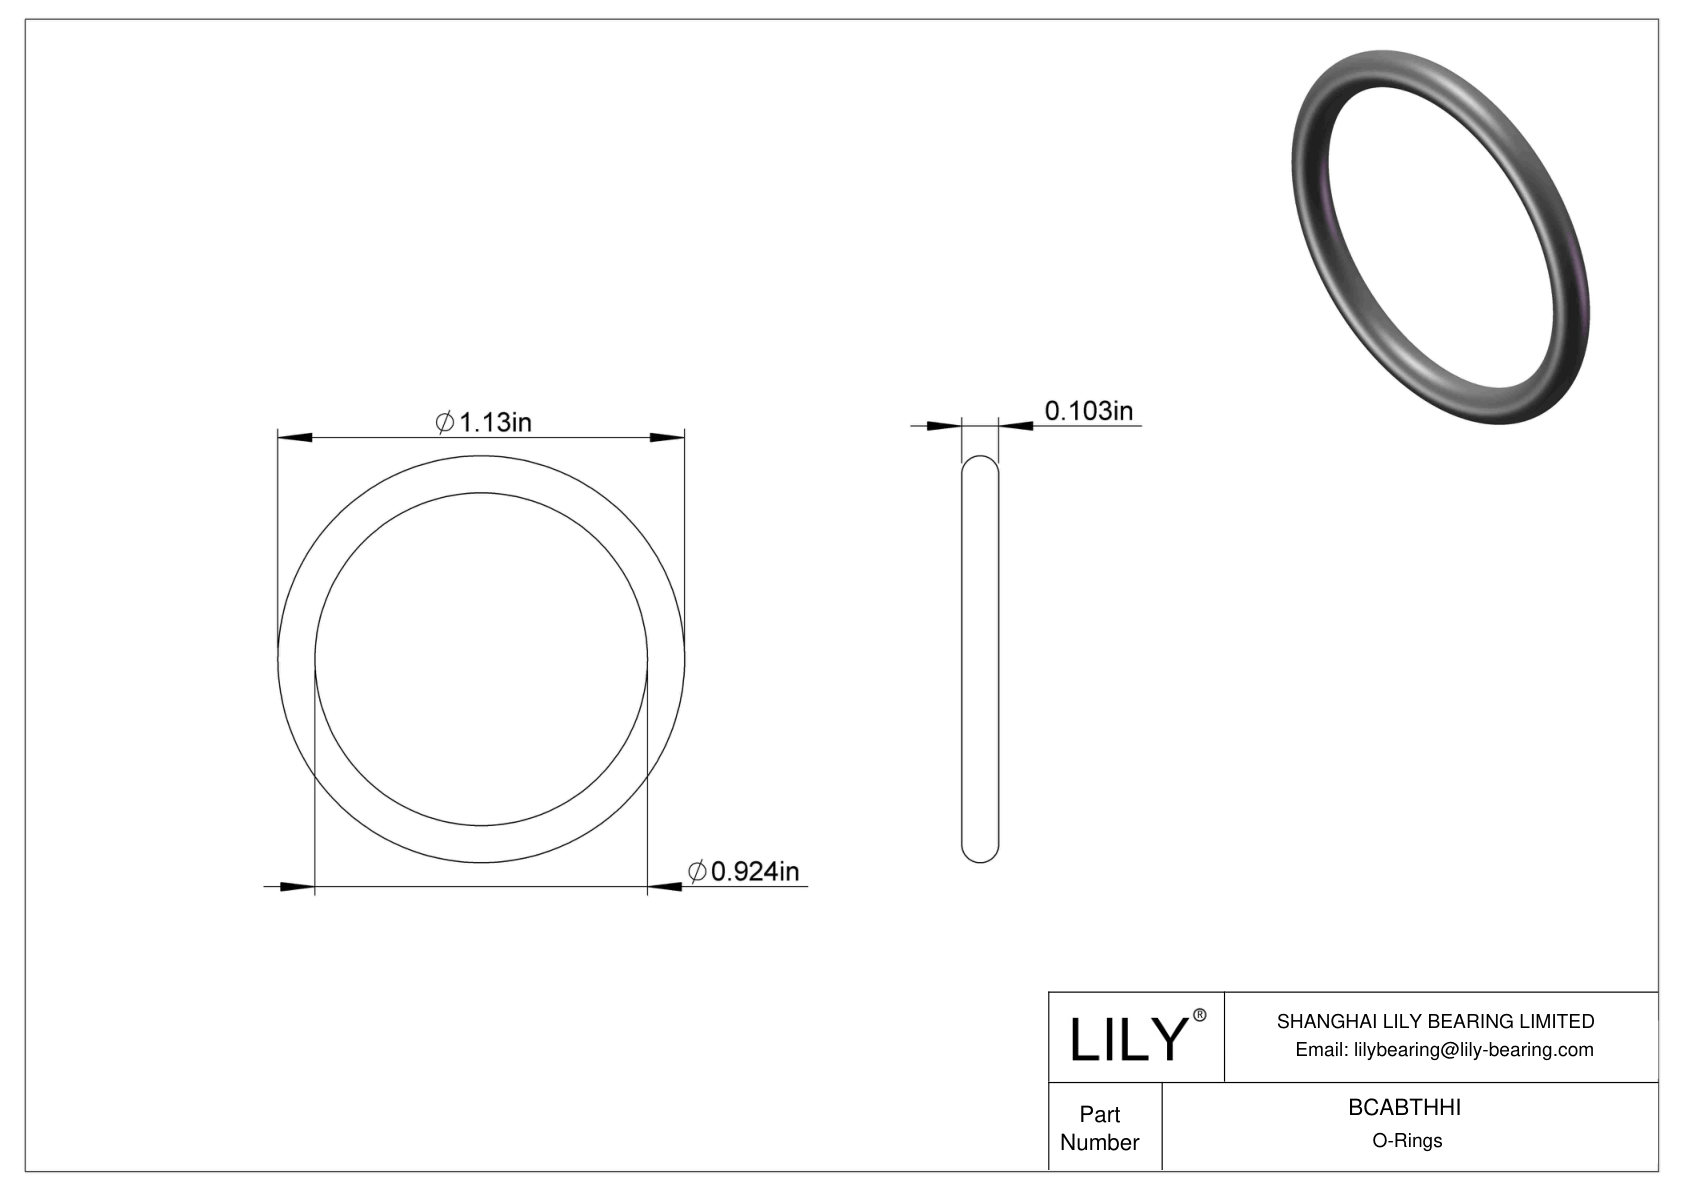 BCABTHHI Chemical Resistant O-rings Round cad drawing